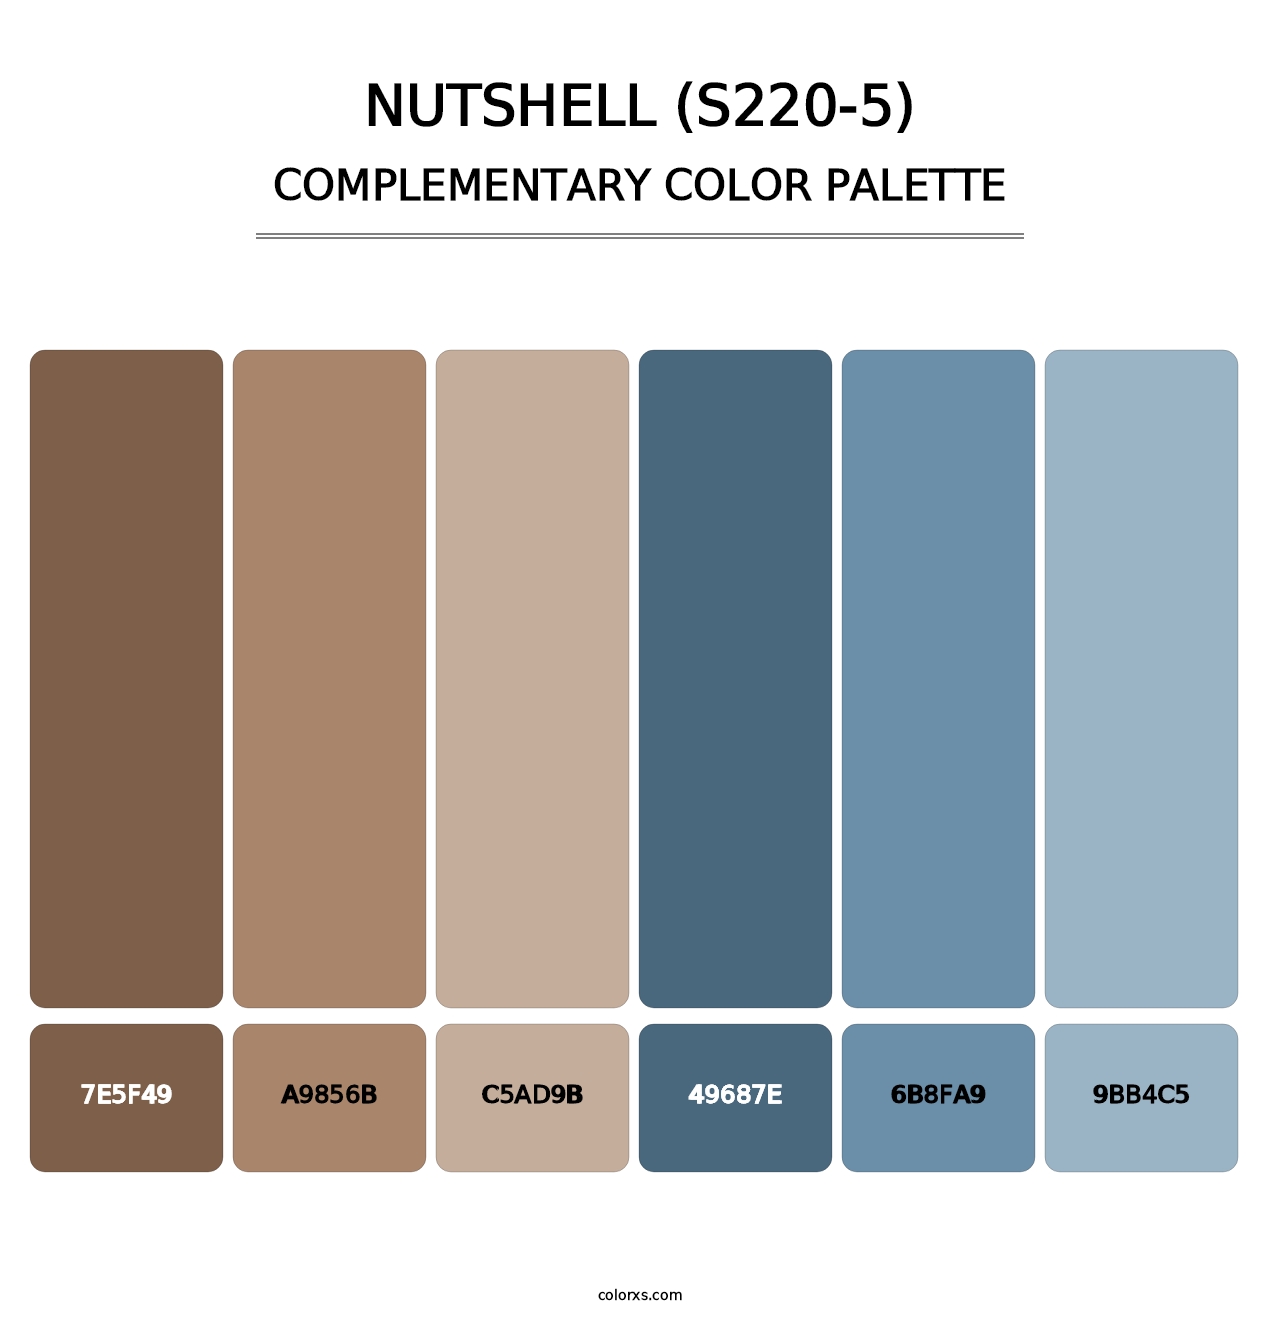 Nutshell (S220-5) - Complementary Color Palette